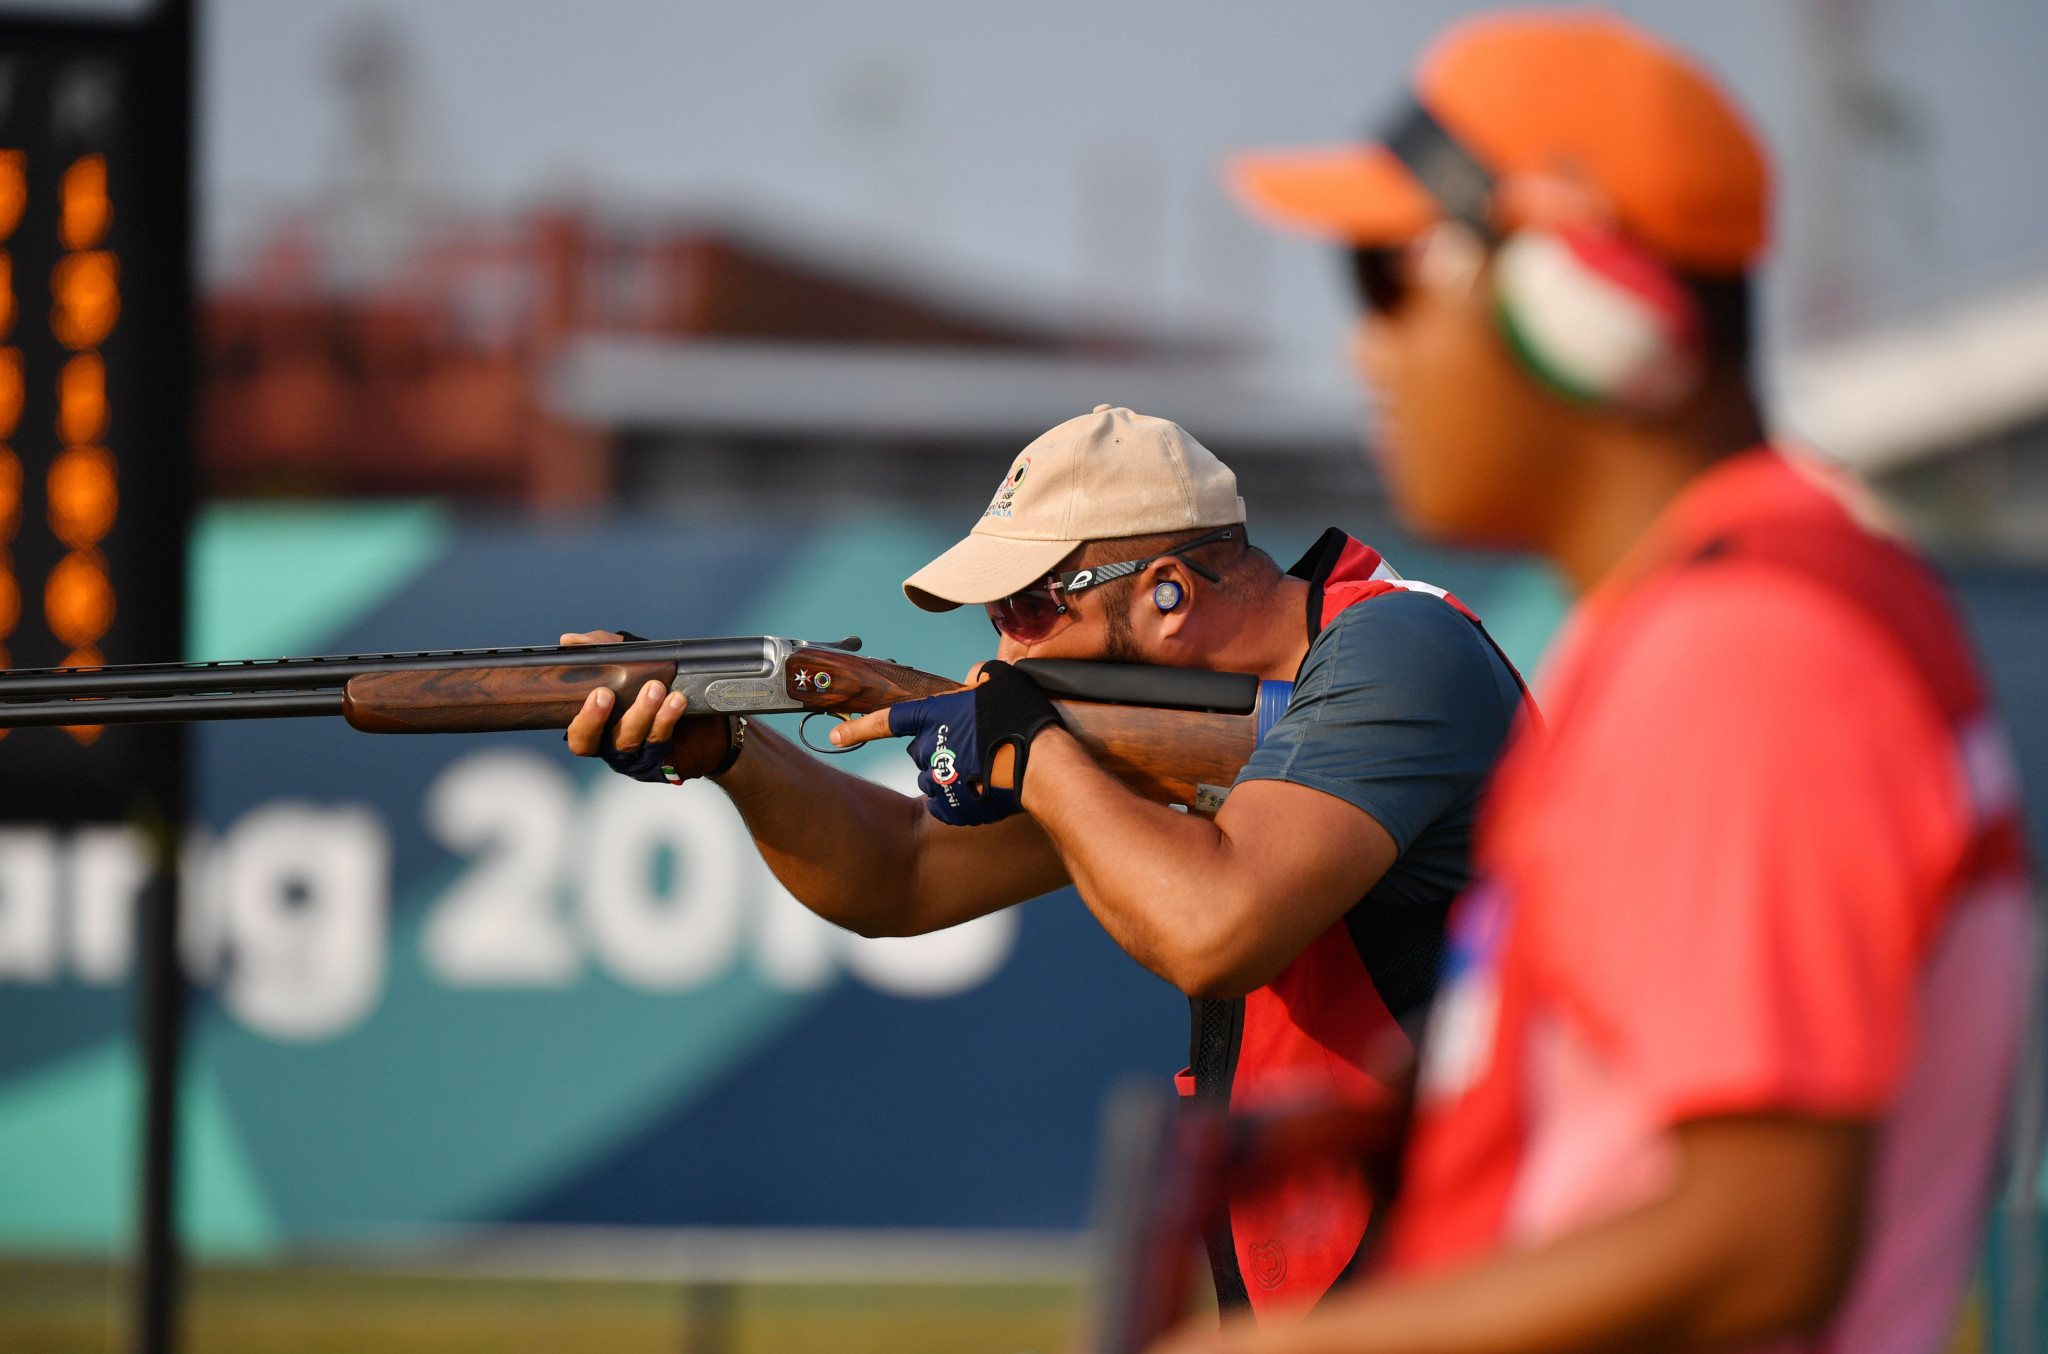 ISSF to begin trials of new mixed team format at Rifle and Pistol World Cup